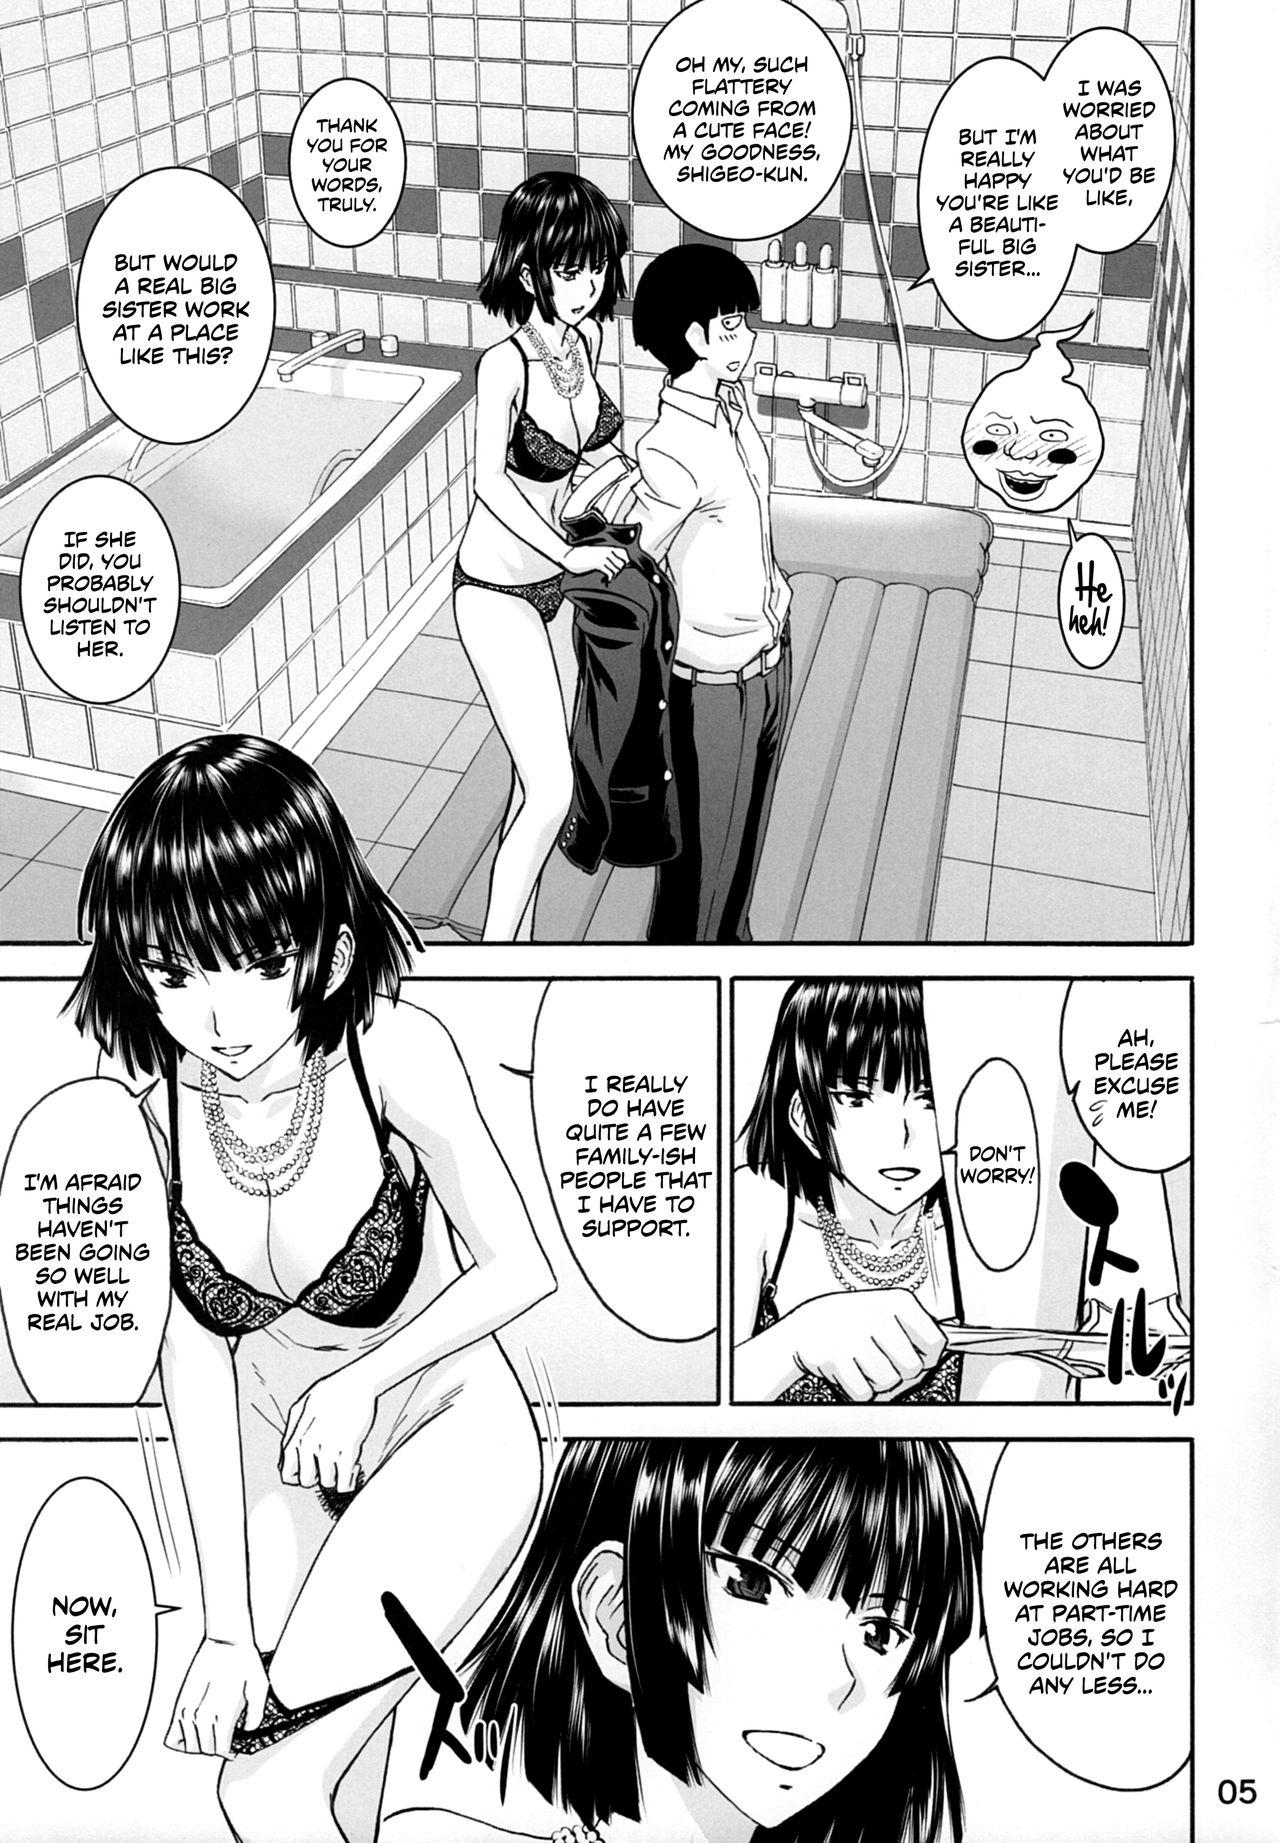 Real Orgasms (C90) [High Thrust (Inomaru)] Current B-Class Rank 1 Hero Losing Your Virginity Where Hellish Fubuki-sama Offers Her Services!! (One Punch Man, Mob Psycho 100) [English] [EHCOVE] - One punch man Mob psycho 100 Thai - Page 4